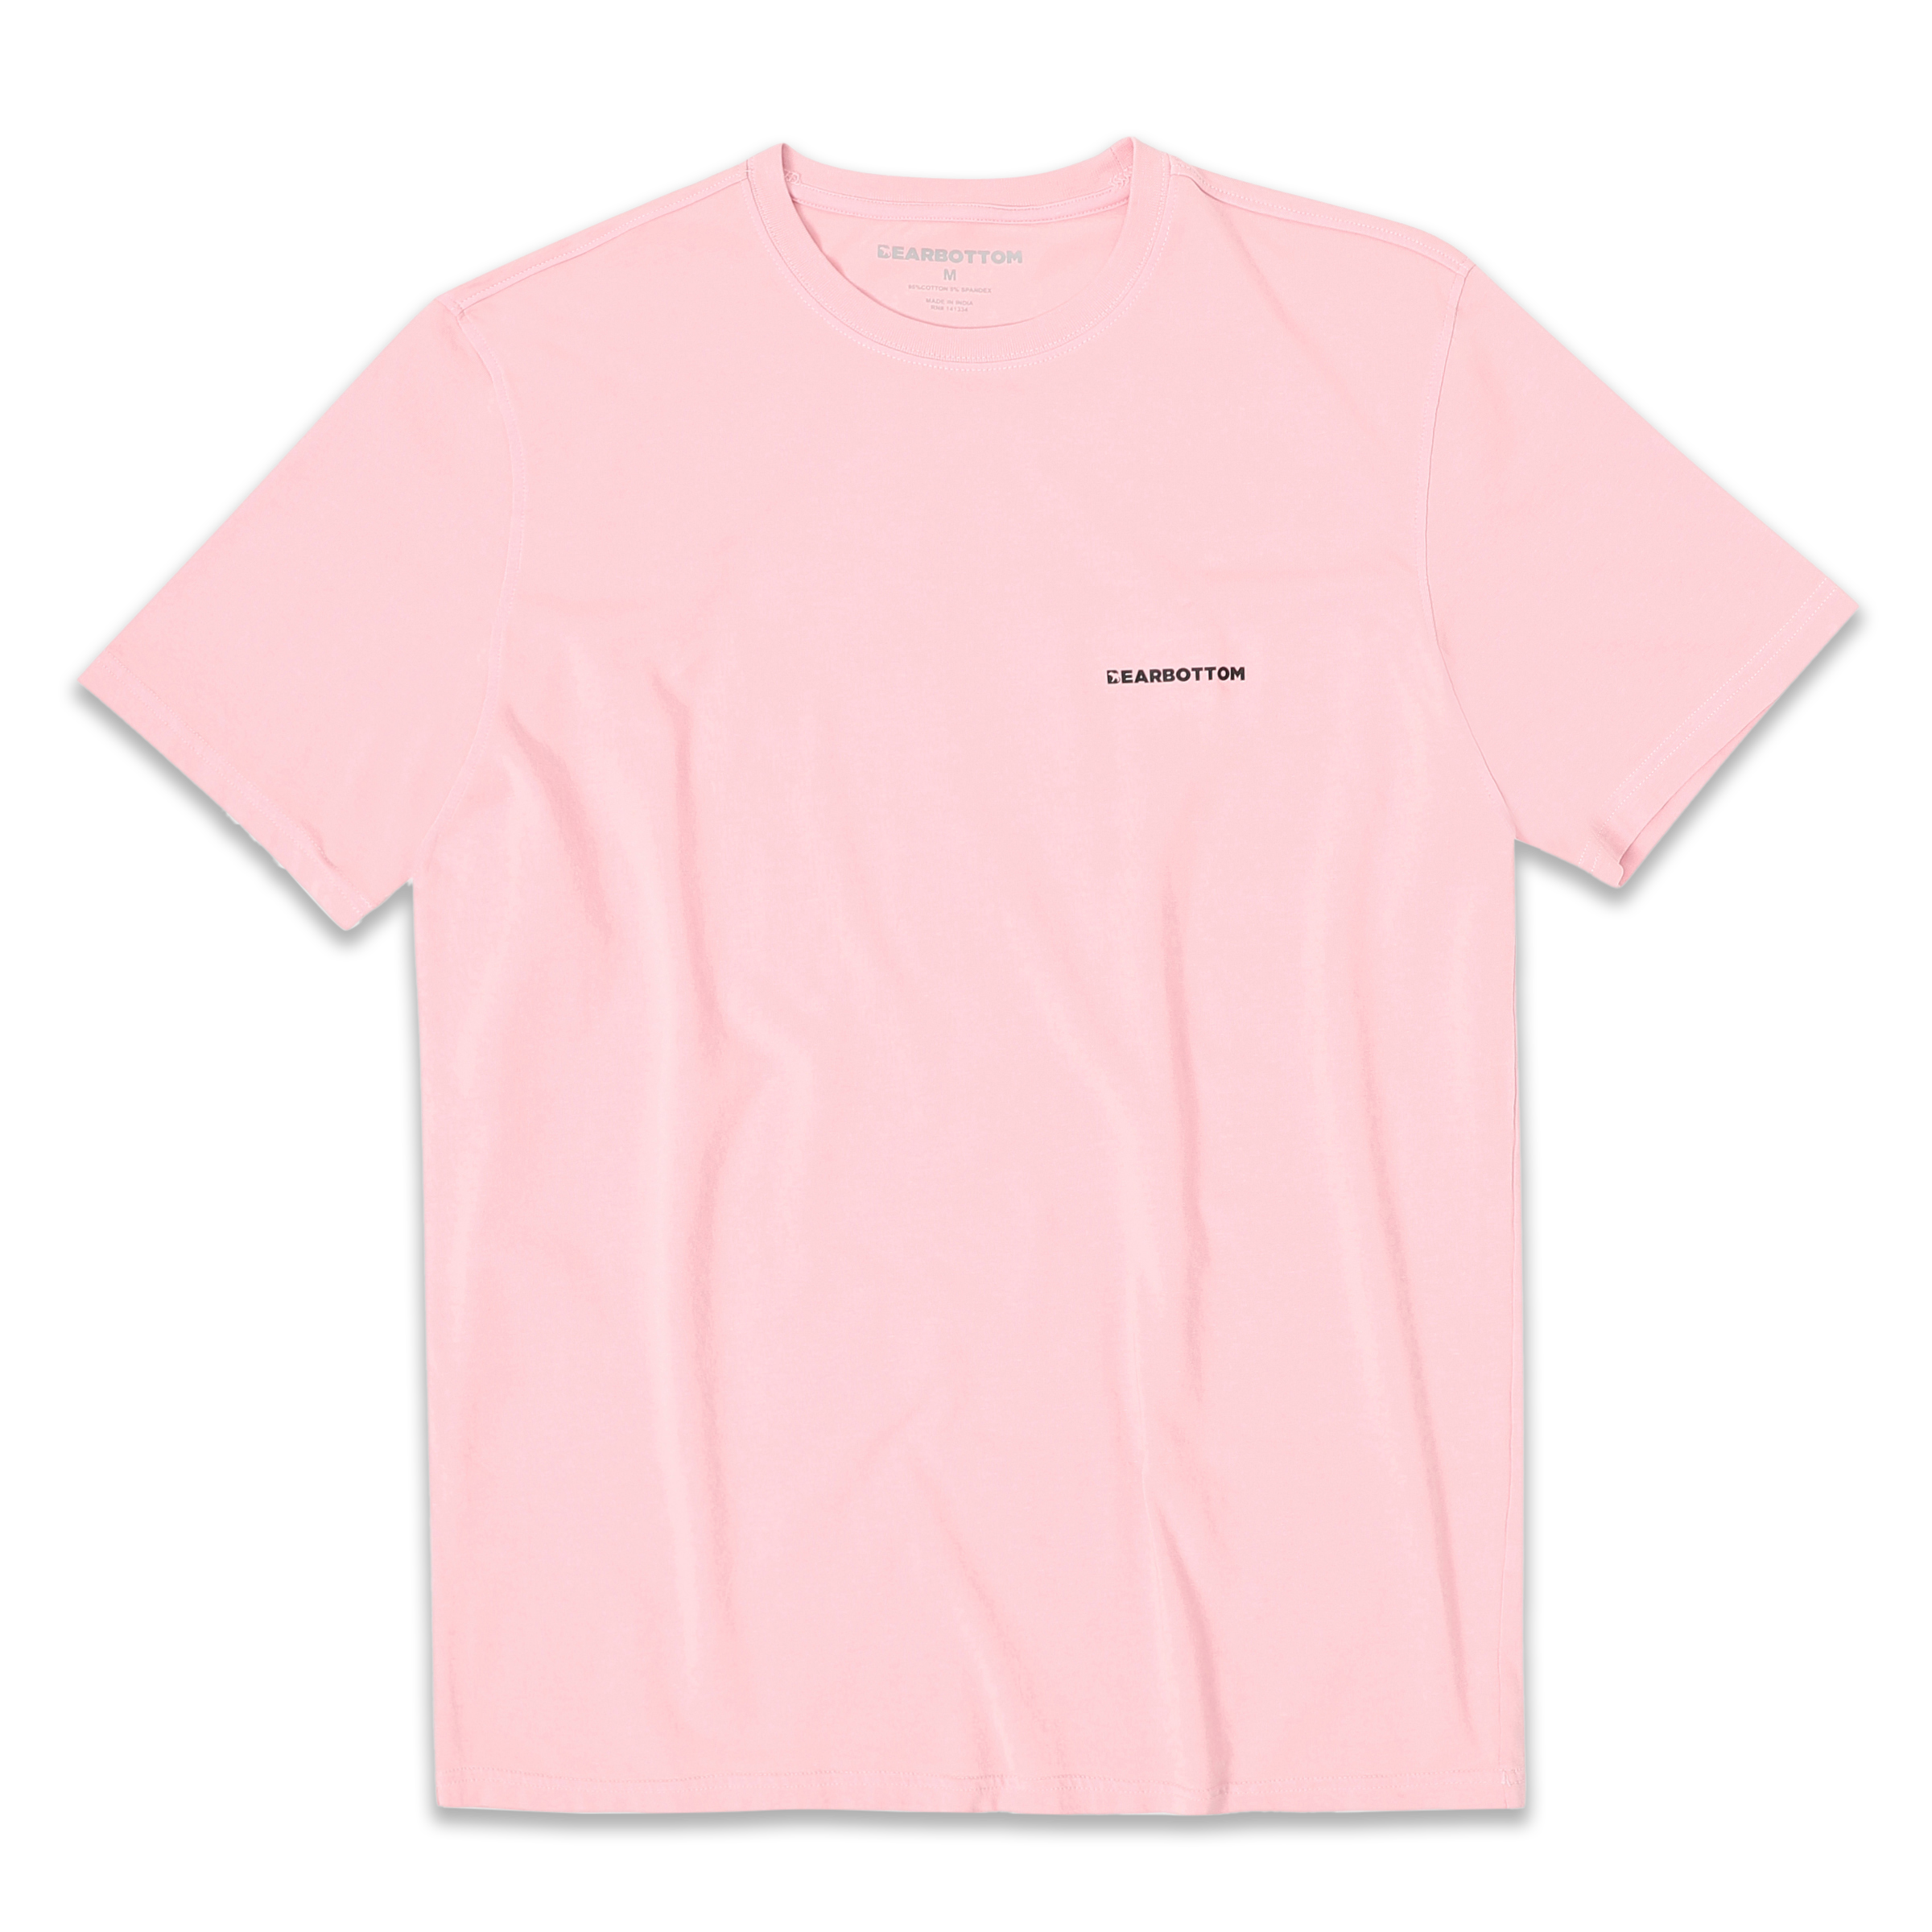 Natural Dye Logo Tee Pink Front with crew neck, short sleeves, and Bearbottom logo printed on front left chest